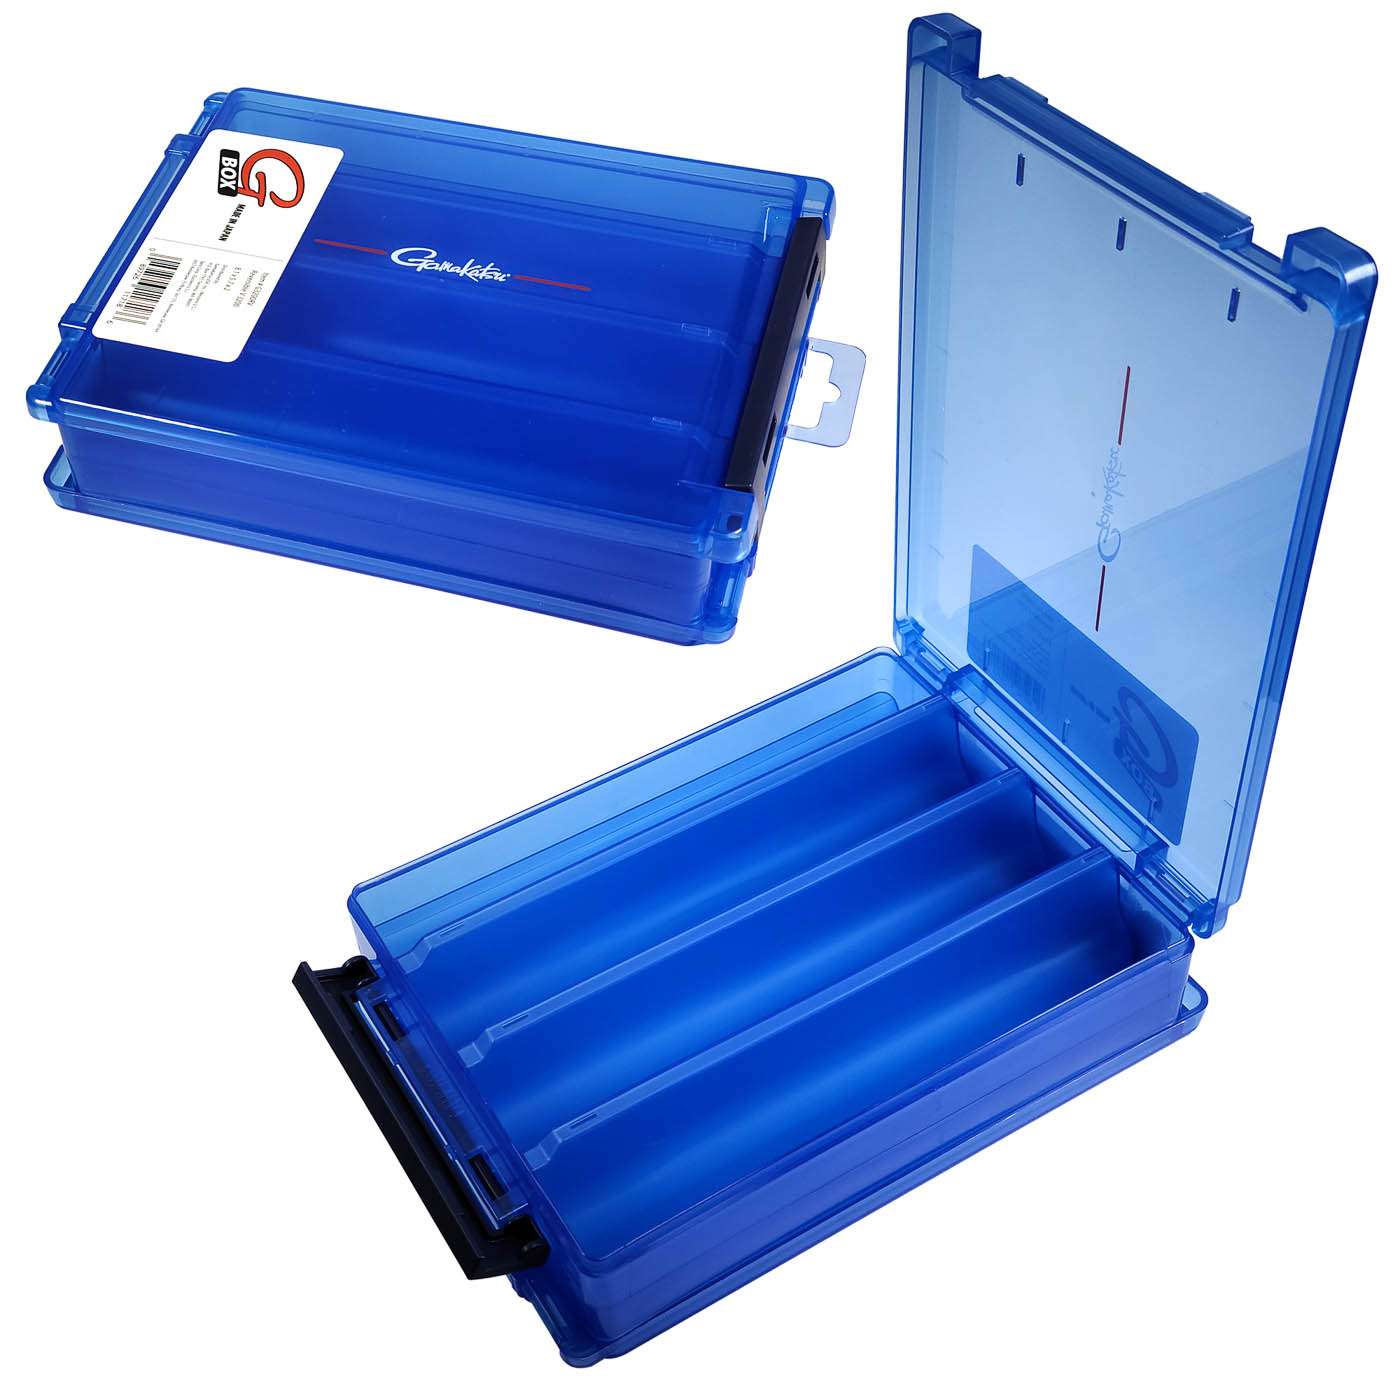 <p><strong>Gamakatsu G-Box Reversible 3200</strong></p><p>Gamakatsu takes tackle storage to the next level with the new G-Box 3200 Reversible Utility Case. The innovative design places a lid on both sides of the box, effectively creating two separate containers in one unit. Each side of the G-Box 3200 Reversible Utility Case has its own lid, doubling tangle-free storage space in each container. The new design features V-shaped dividers that keep saltwater jigs, crankbaits and other favorites organized and ready to go. Stash a different type of lure on each side and switch fishing styles with a flip of a box. Wide, locking latches keep the boxes securely shut even if they bounce along in the boat or the bag. $16.88. <a href=